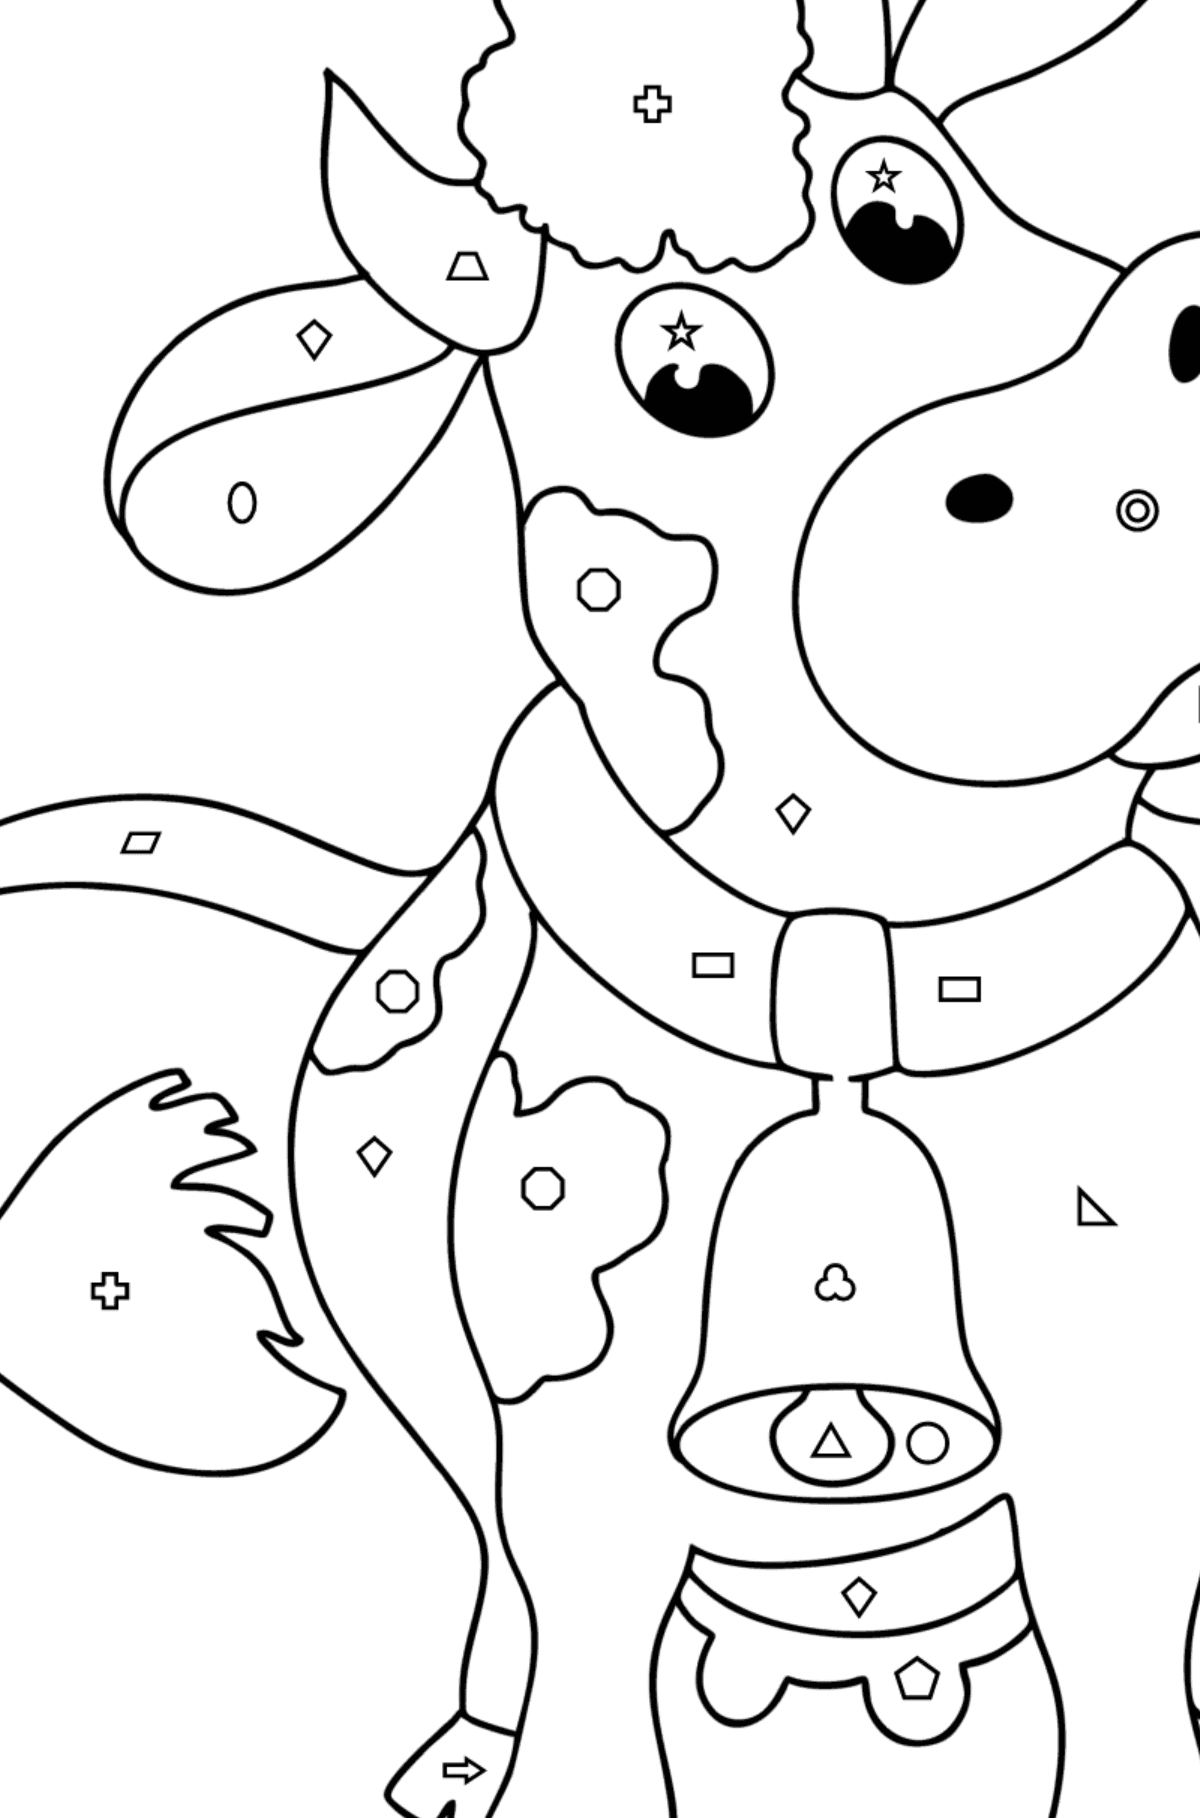 Coloring page cow with a bell - Coloring by Geometric Shapes for Kids